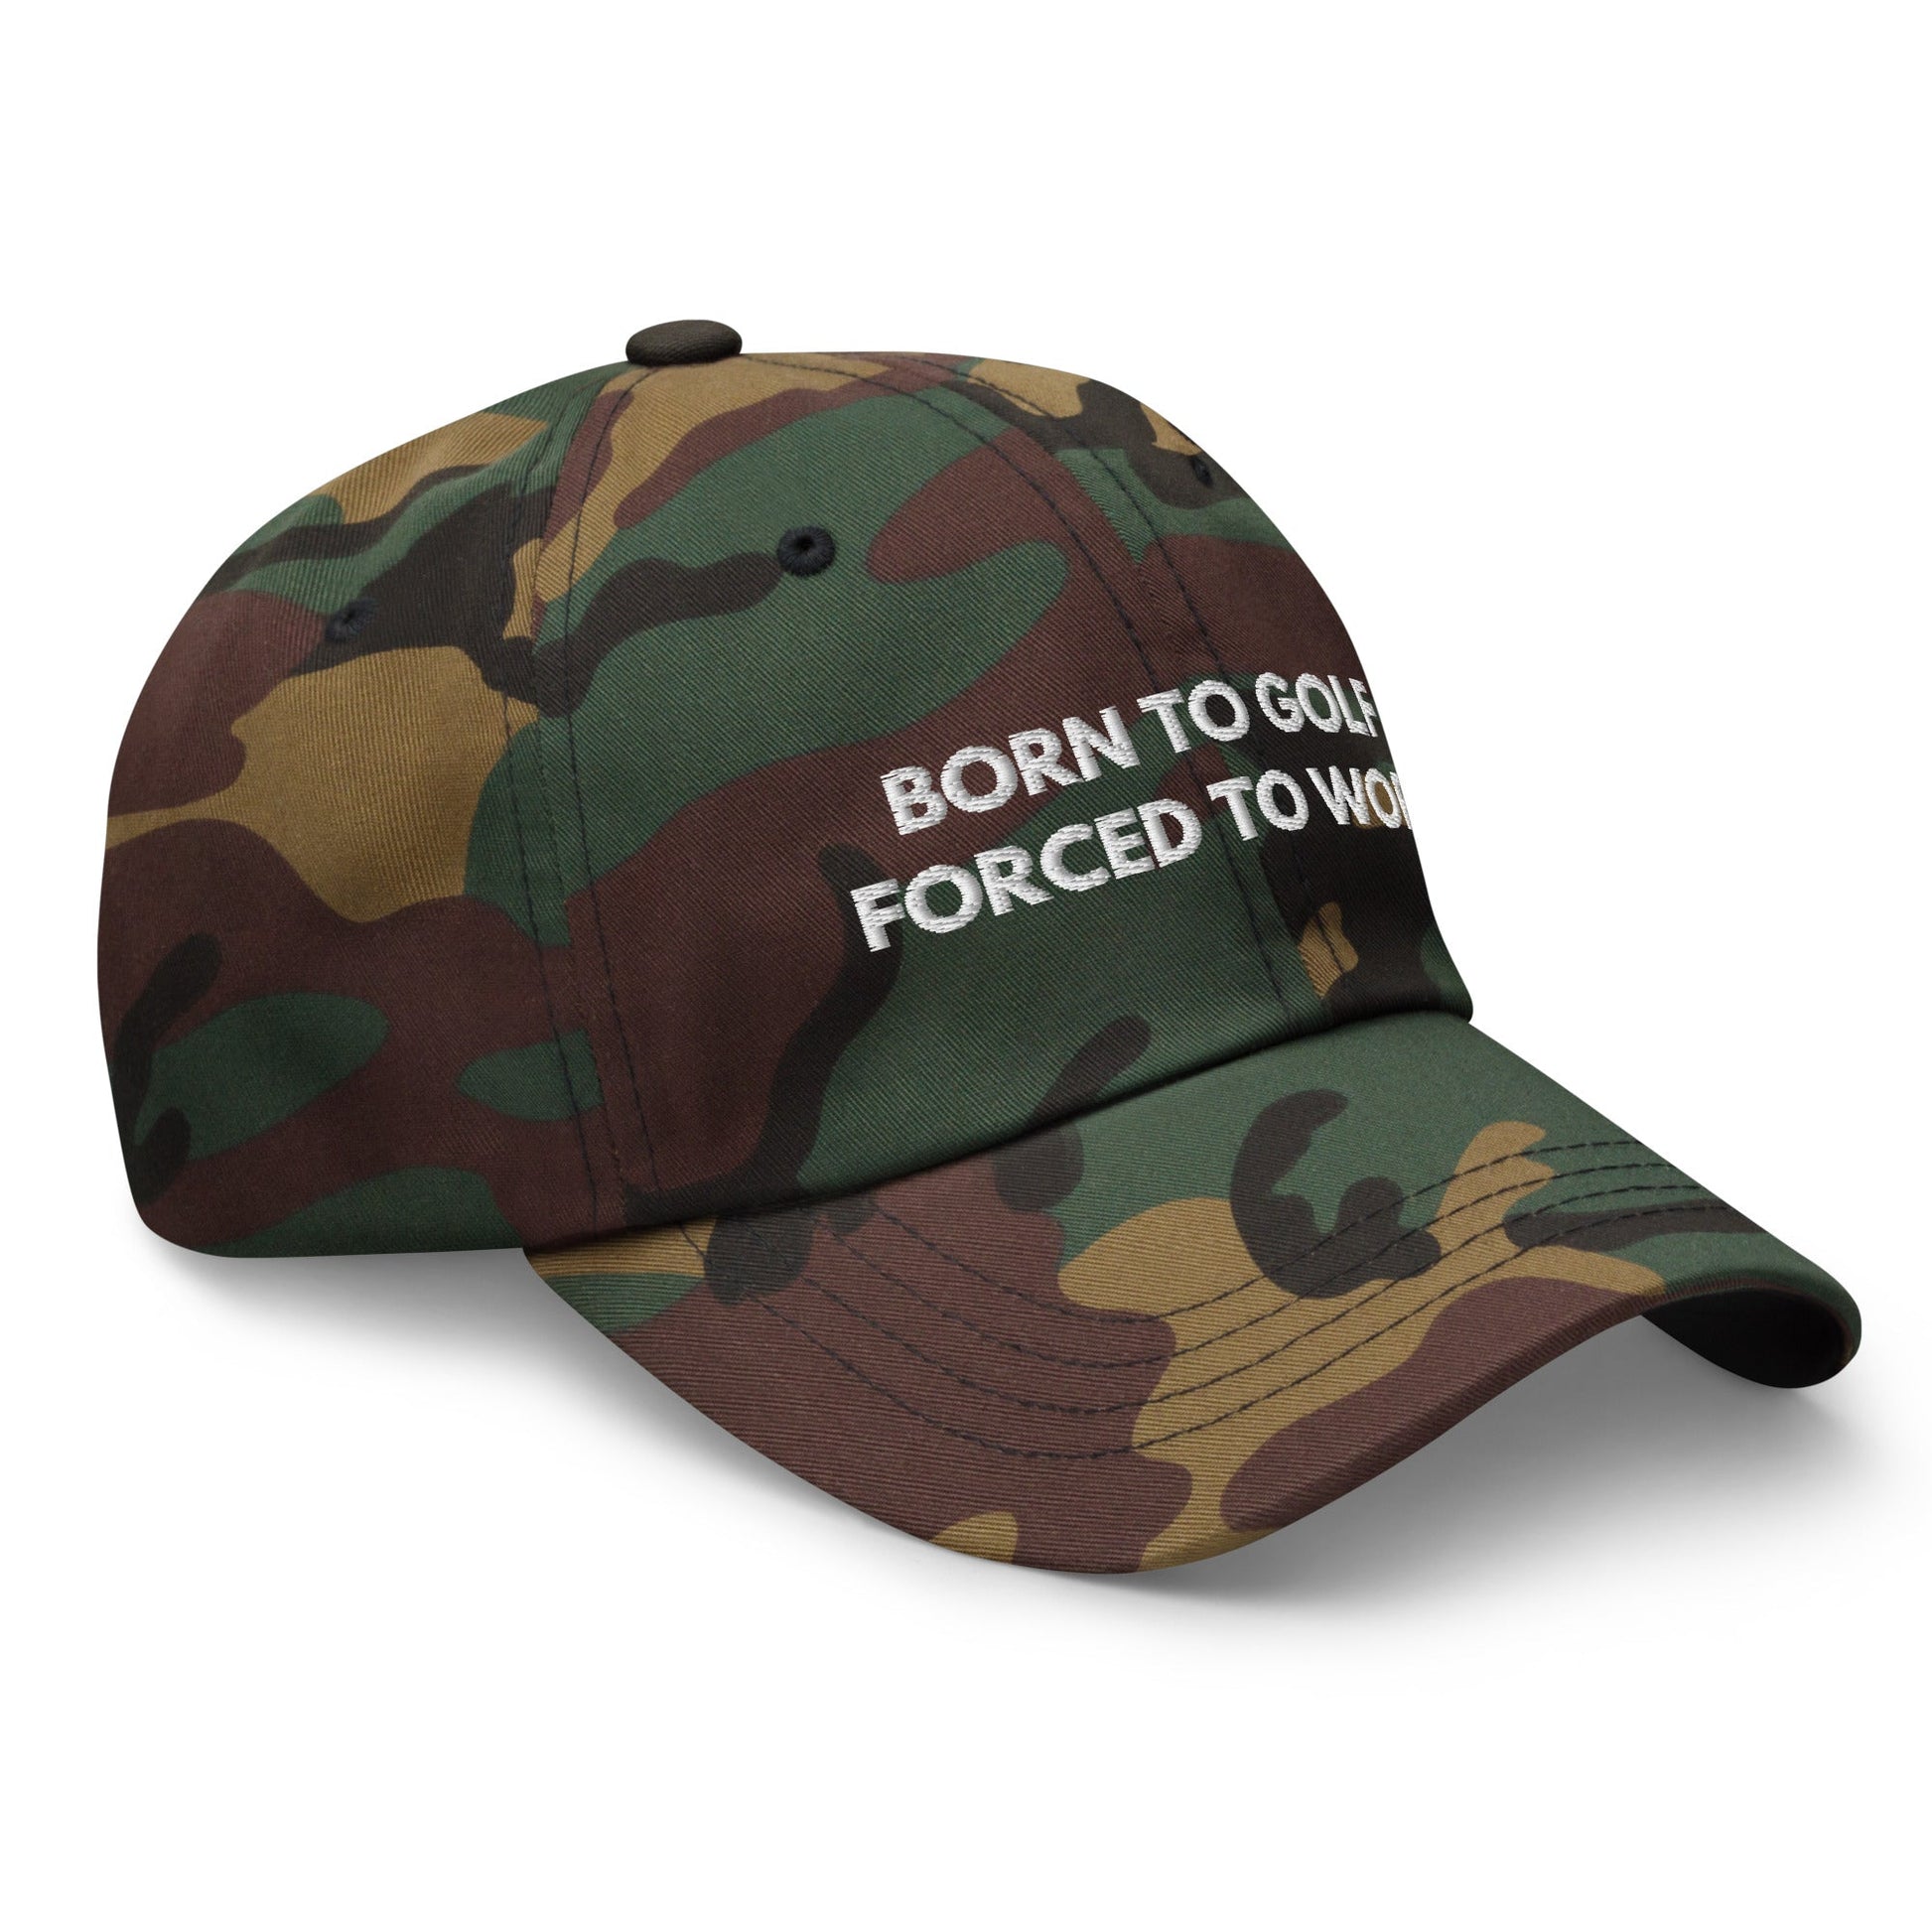 Funny Golfer Gifts  Dad Cap Green Camo Born to Golf, Forced To Work Hat Cap